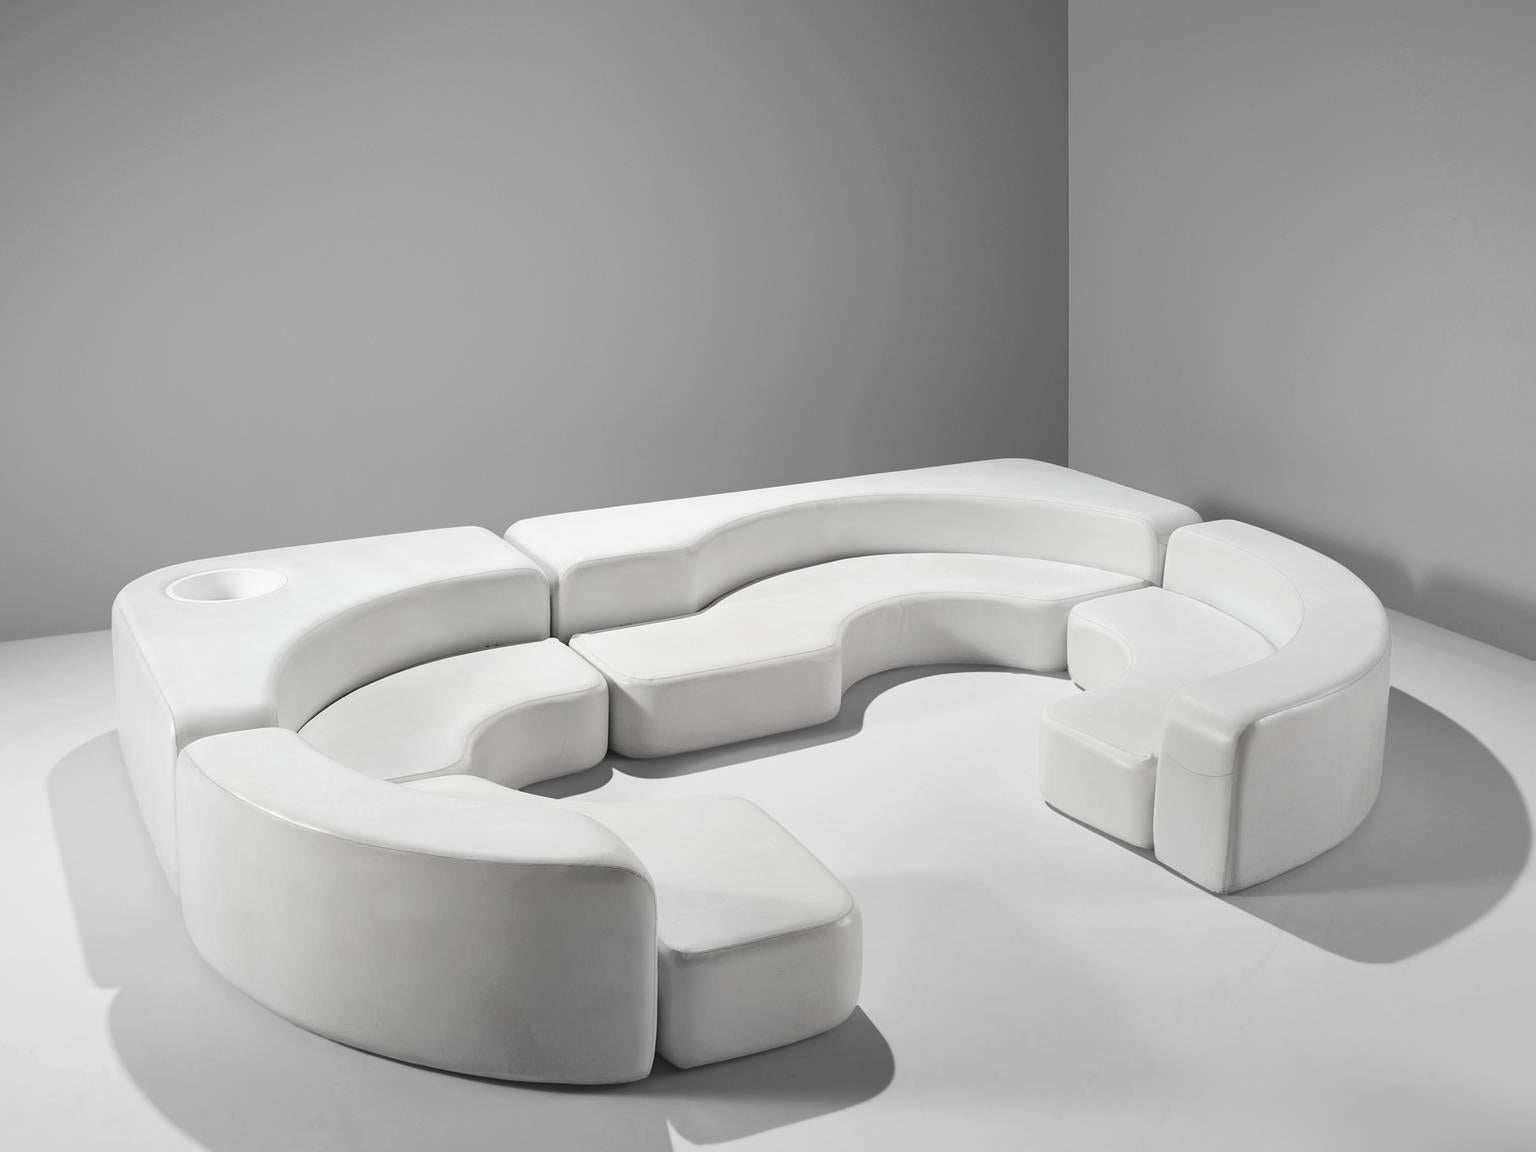 Ennio Chiggio for Nikol Internazionale, white faux leather sofa, Italy, 1970s

This important canapé Environ One is designed by Ennio Chiggo (1937-) for Nikol Internazionale in the 1970s. This rare modular sofa is very voluptuous and very large. The